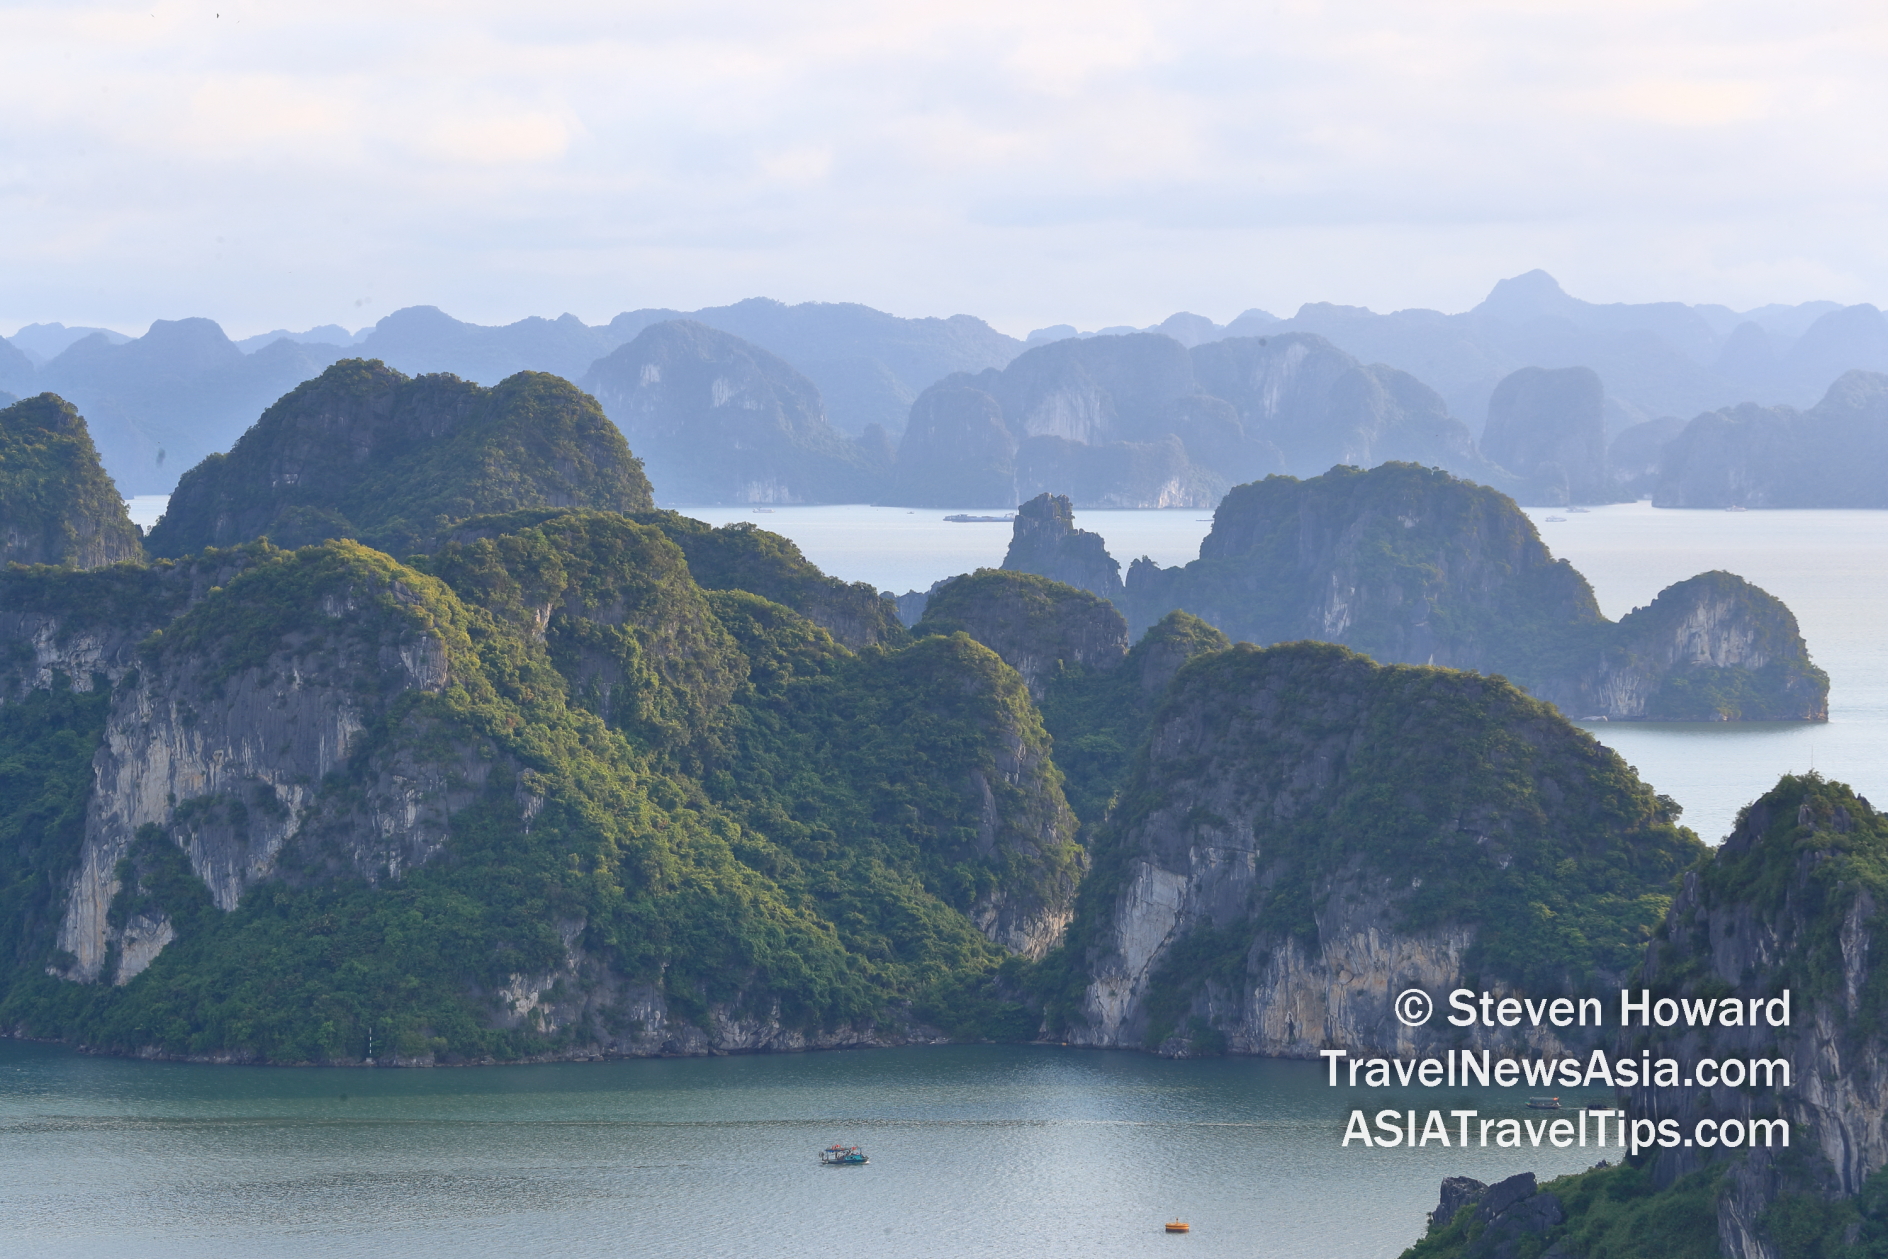 Halong Bay in Vietnam. Picture by Steven Howard of TravelNewsAsia.com Click to enlarge.